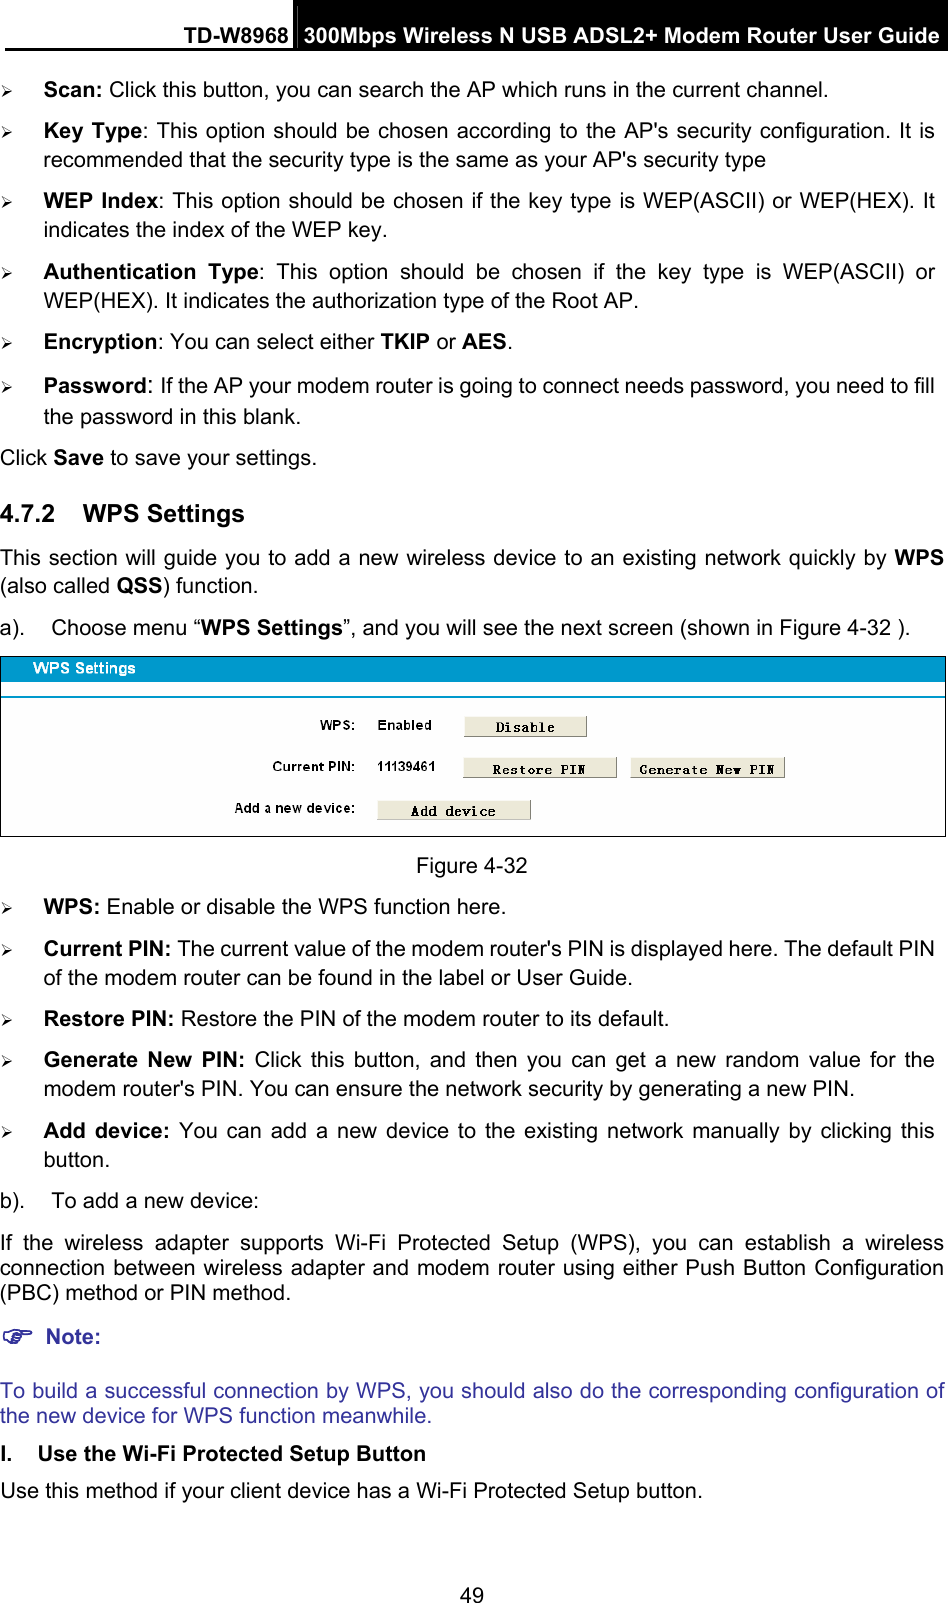 TD-W8968  300Mbps Wireless N USB ADSL2+ Modem Router User Guide 49 ¾ Scan: Click this button, you can search the AP which runs in the current channel. ¾ Key Type: This option should be chosen according to the AP&apos;s security configuration. It is recommended that the security type is the same as your AP&apos;s security type ¾ WEP Index: This option should be chosen if the key type is WEP(ASCII) or WEP(HEX). It indicates the index of the WEP key. ¾ Authentication Type: This option should be chosen if the key type is WEP(ASCII) or WEP(HEX). It indicates the authorization type of the Root AP. ¾ Encryption: You can select either TKIP or AES. ¾ Password: If the AP your modem router is going to connect needs password, you need to fill the password in this blank. Click Save to save your settings. 4.7.2  WPS Settings This section will guide you to add a new wireless device to an existing network quickly by WPS (also called QSS) function. a).  Choose menu “WPS Settings”, and you will see the next screen (shown in Figure 4-32 ).    Figure 4-32 ¾ WPS: Enable or disable the WPS function here.   ¾ Current PIN: The current value of the modem router&apos;s PIN is displayed here. The default PIN of the modem router can be found in the label or User Guide.   ¾ Restore PIN: Restore the PIN of the modem router to its default.   ¾ Generate New PIN: Click this button, and then you can get a new random value for the modem router&apos;s PIN. You can ensure the network security by generating a new PIN. ¾ Add device: You can add a new device to the existing network manually by clicking this button. b).  To add a new device: If the wireless adapter supports Wi-Fi Protected Setup (WPS), you can establish a wireless connection between wireless adapter and modem router using either Push Button Configuration (PBC) method or PIN method. ) Note: To build a successful connection by WPS, you should also do the corresponding configuration of the new device for WPS function meanwhile. I.  Use the Wi-Fi Protected Setup Button Use this method if your client device has a Wi-Fi Protected Setup button. 